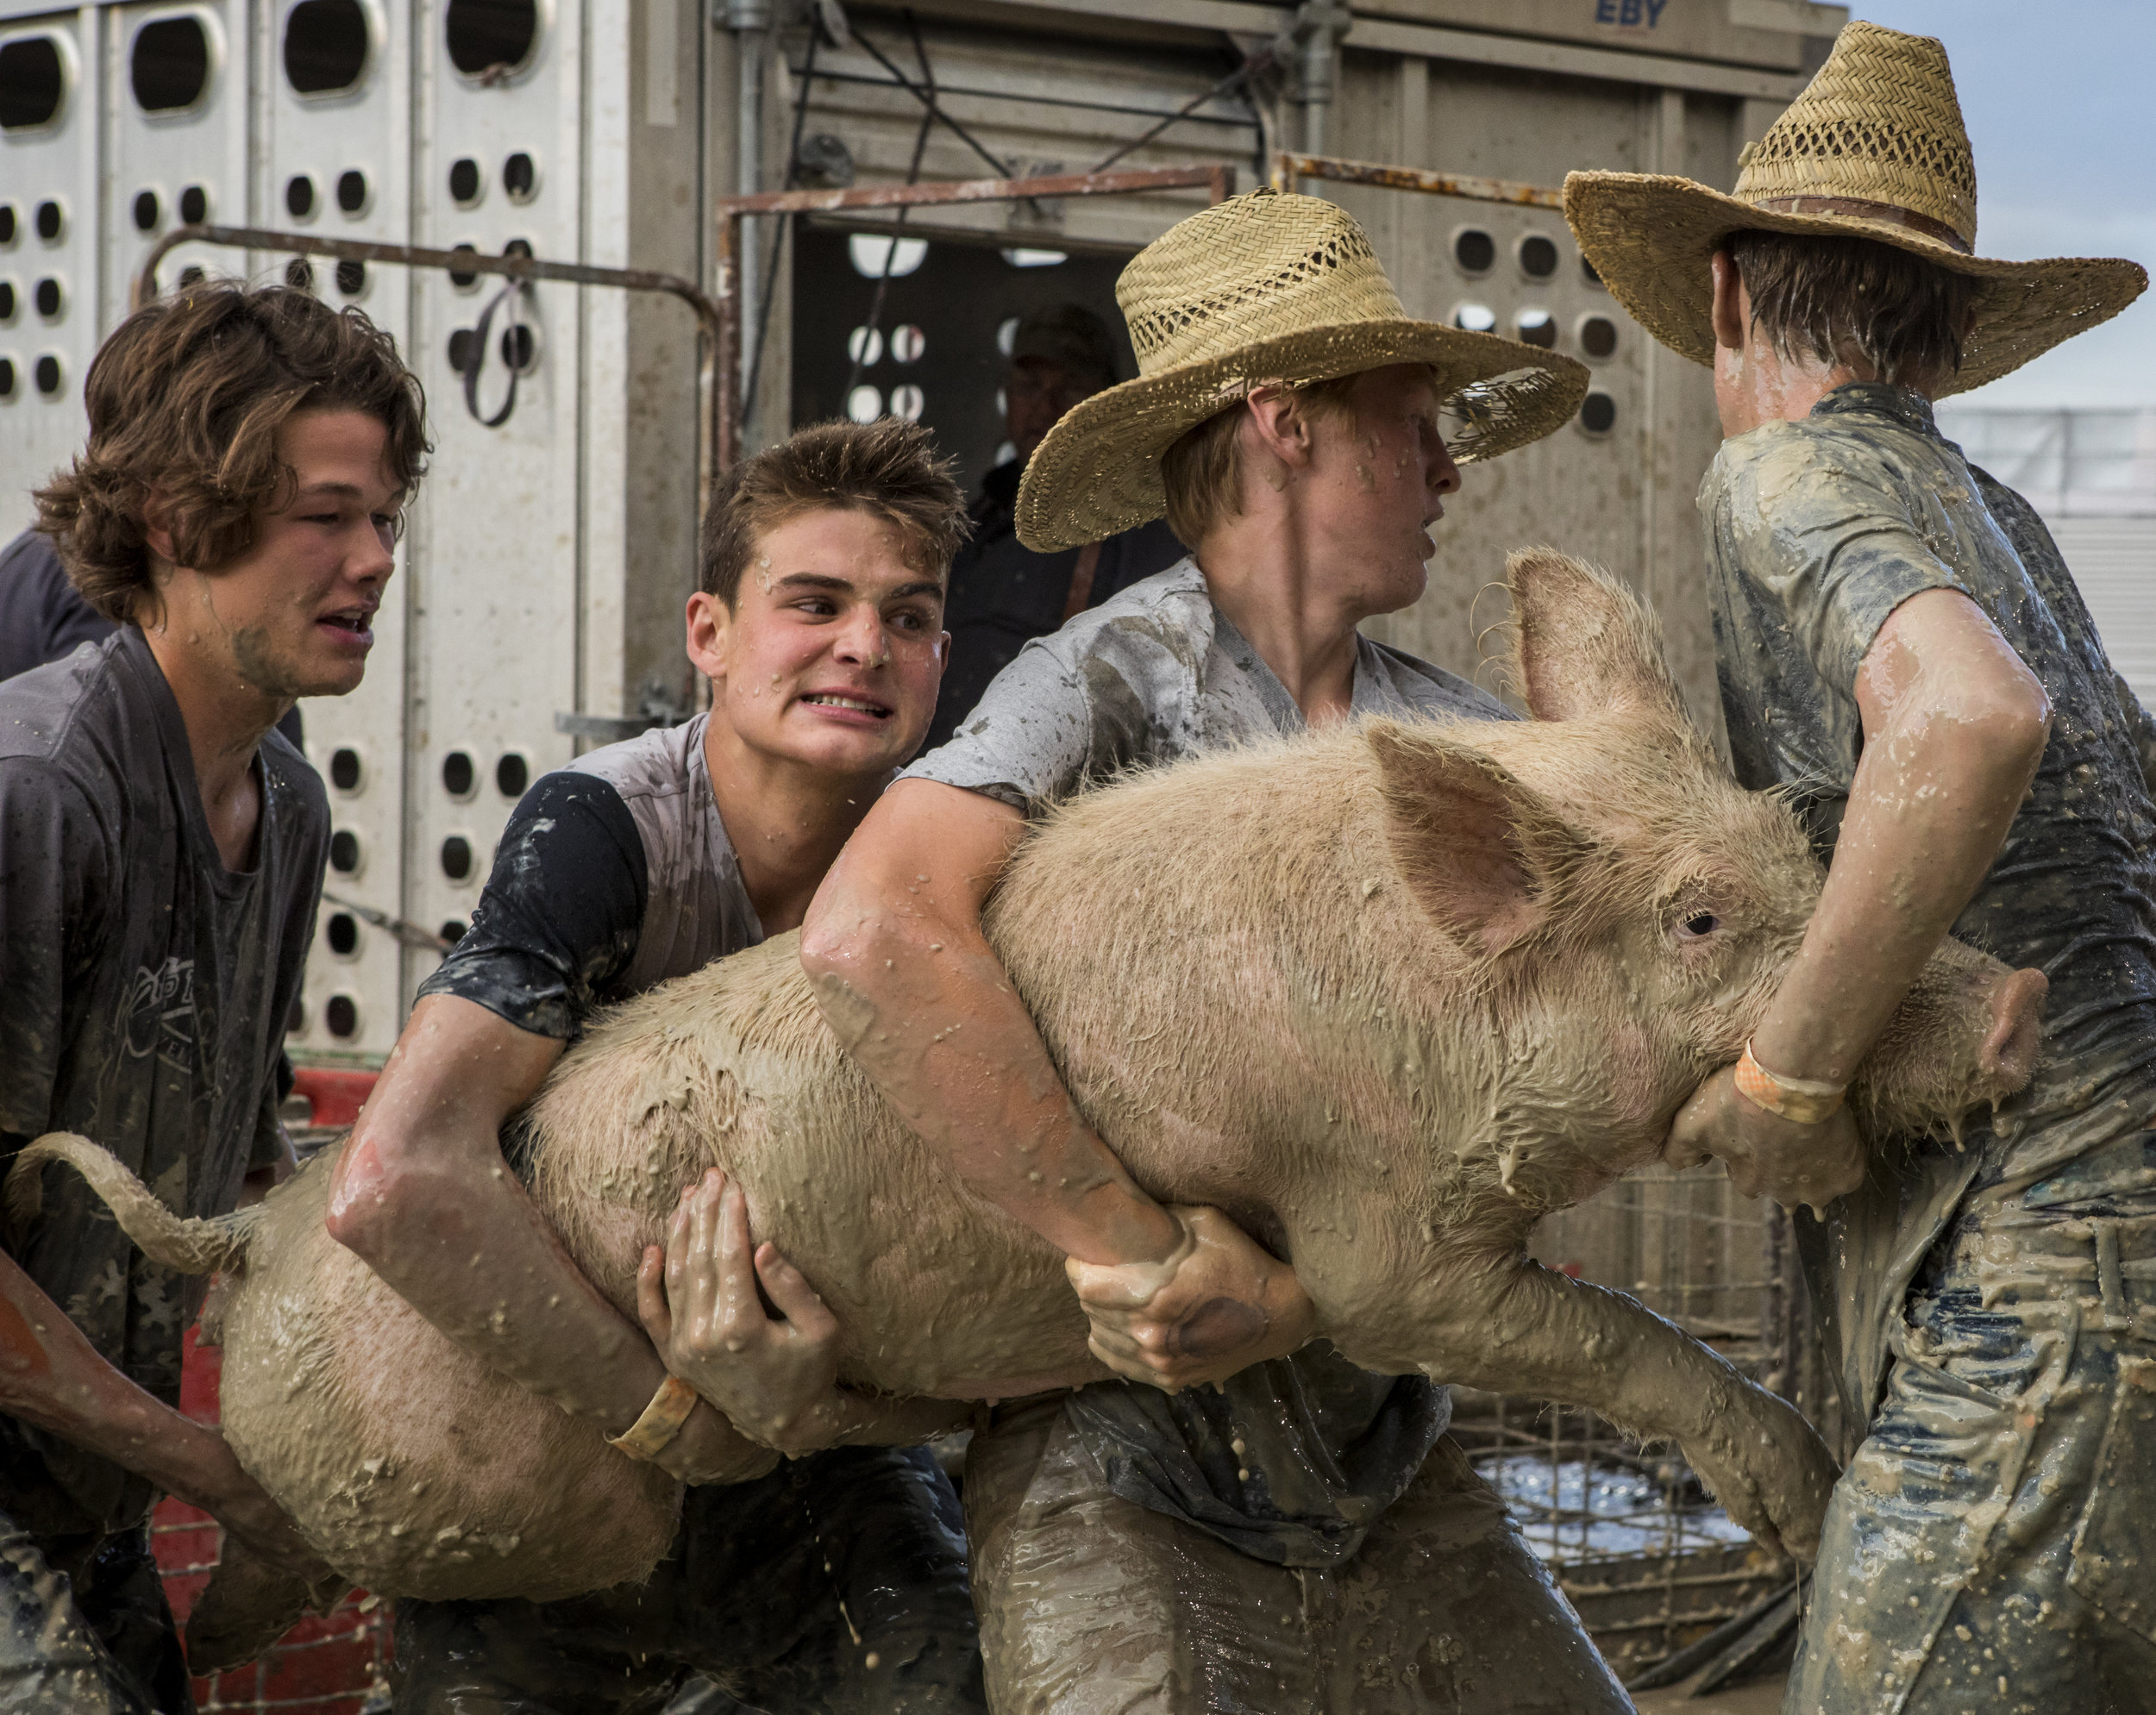  Ian Dalton, Wyley Menolascino, Jack Love and Riggs Turner work together to capture their hog at the Teton County Fair's pig wrestling event on July 24, 2018 in Jackson, Wyo. 